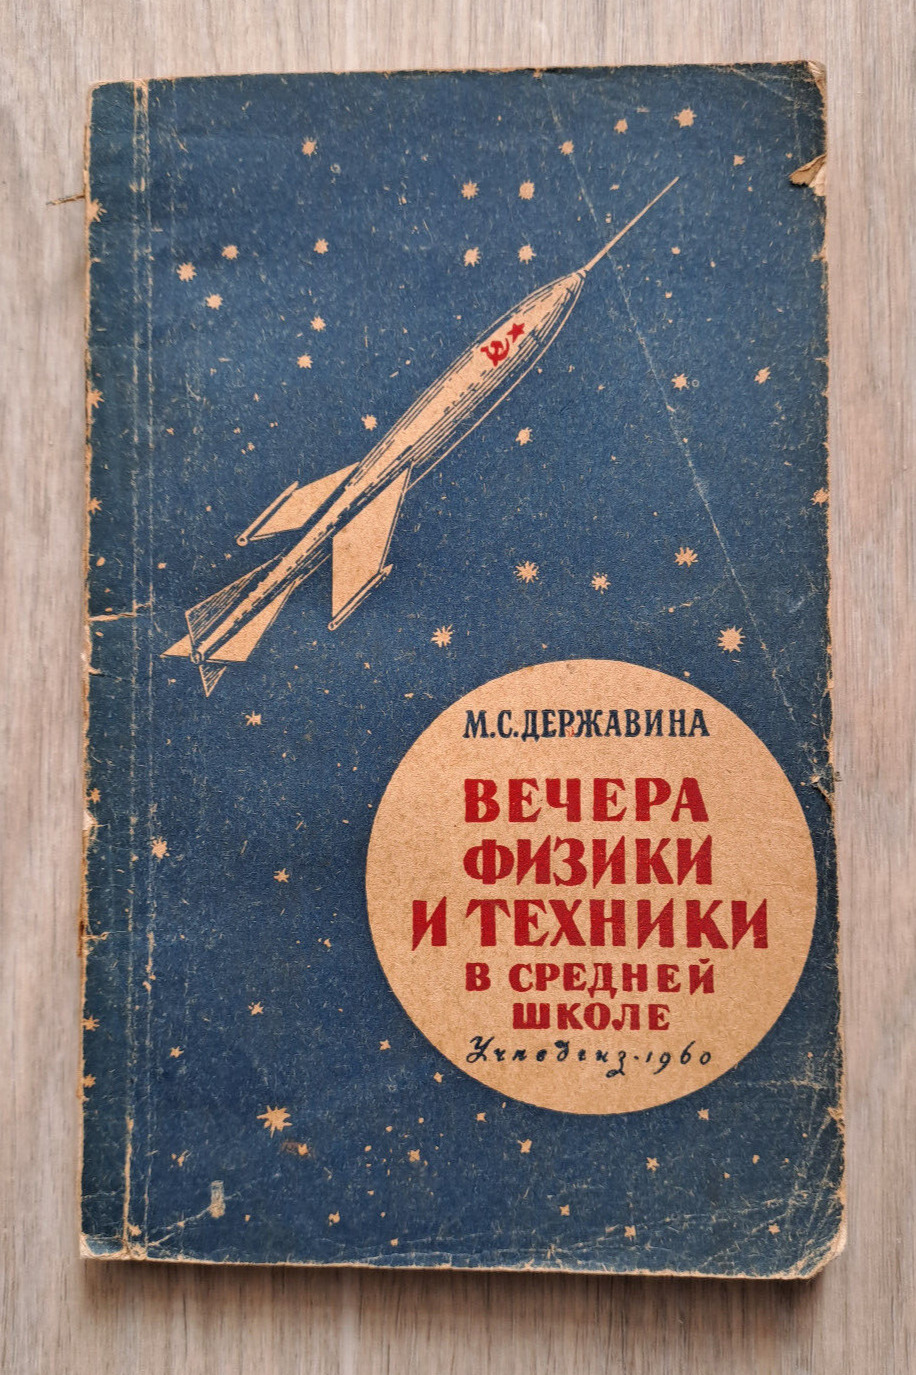 1960 Physics and technology School Inventions Scientists Experience Russian book